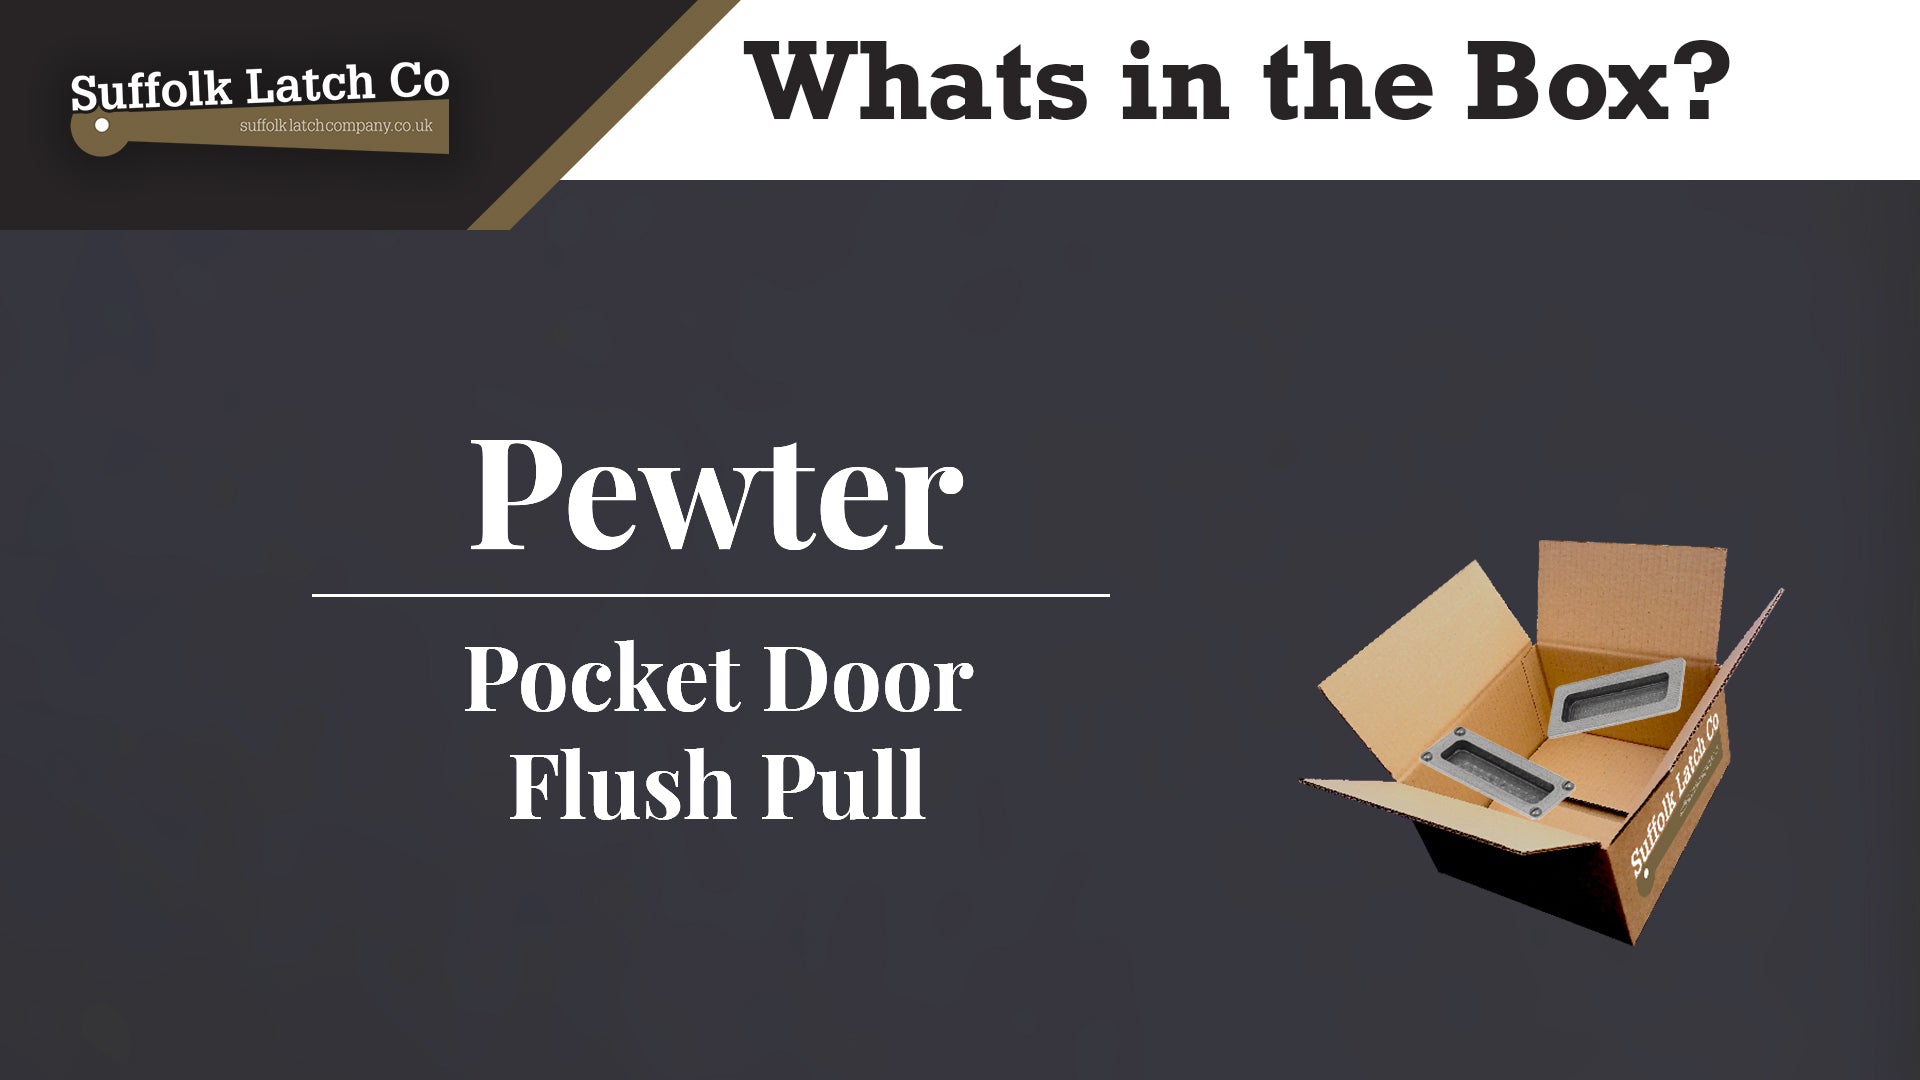 What's in the box? Pewter Pocket Door Flush Pull